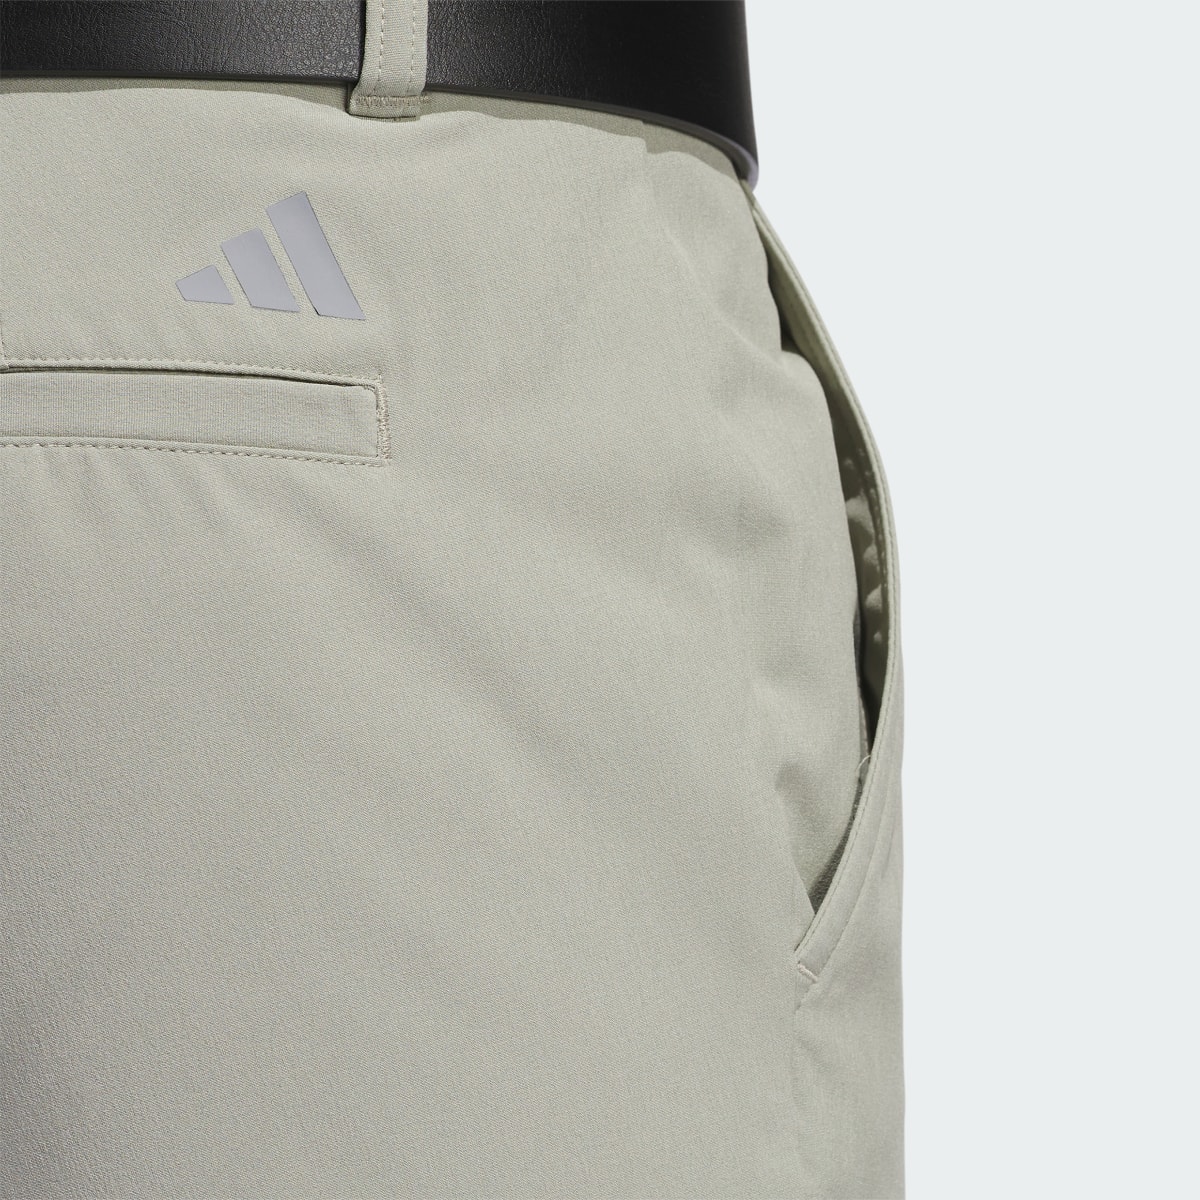 Adidas Ultimate365 Tapered Golf Pants. 6